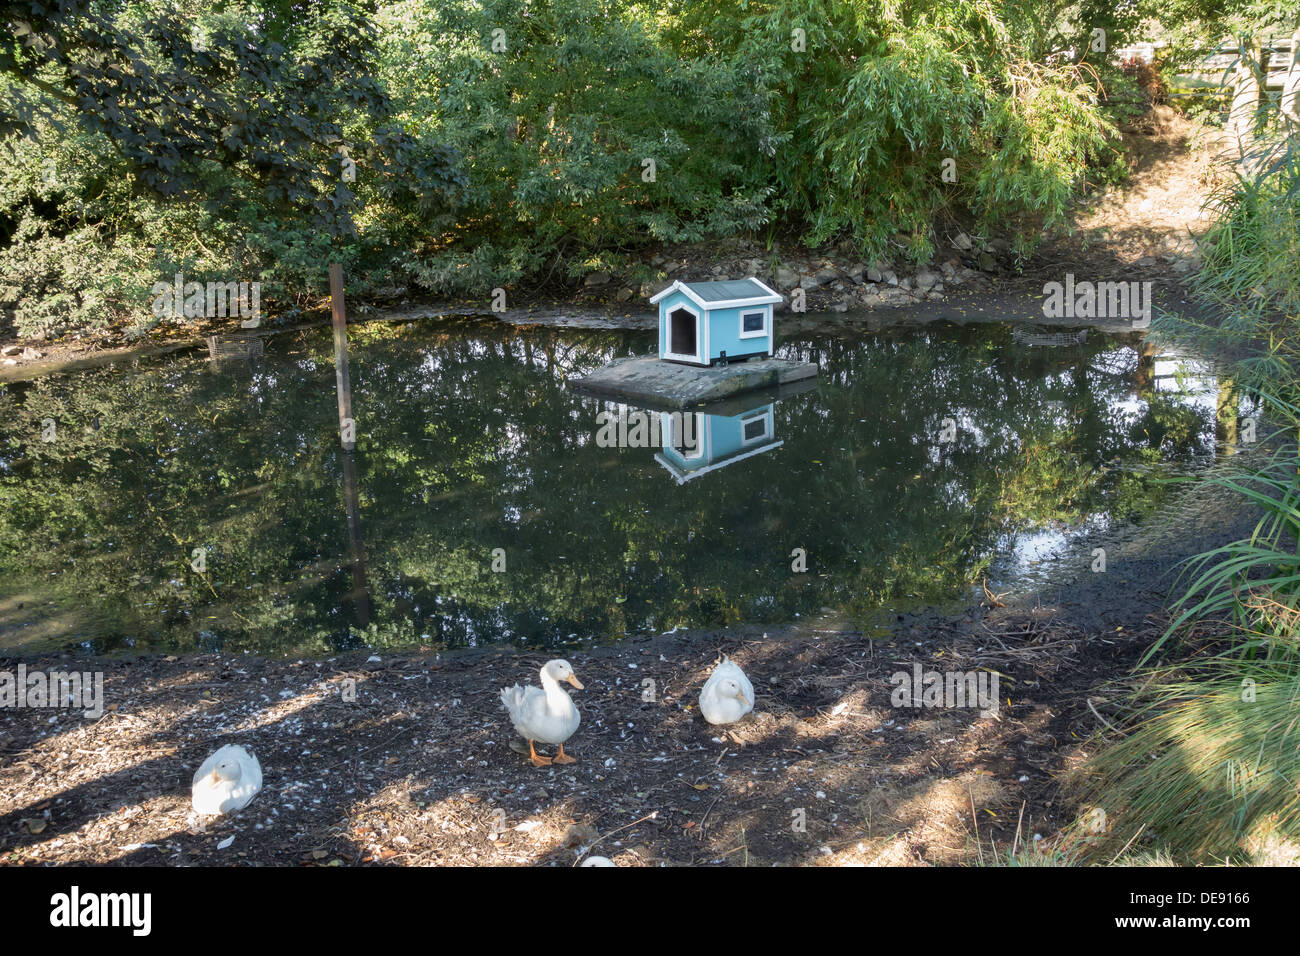 A village duck pond with three white ducks and a duck house Stock Photo